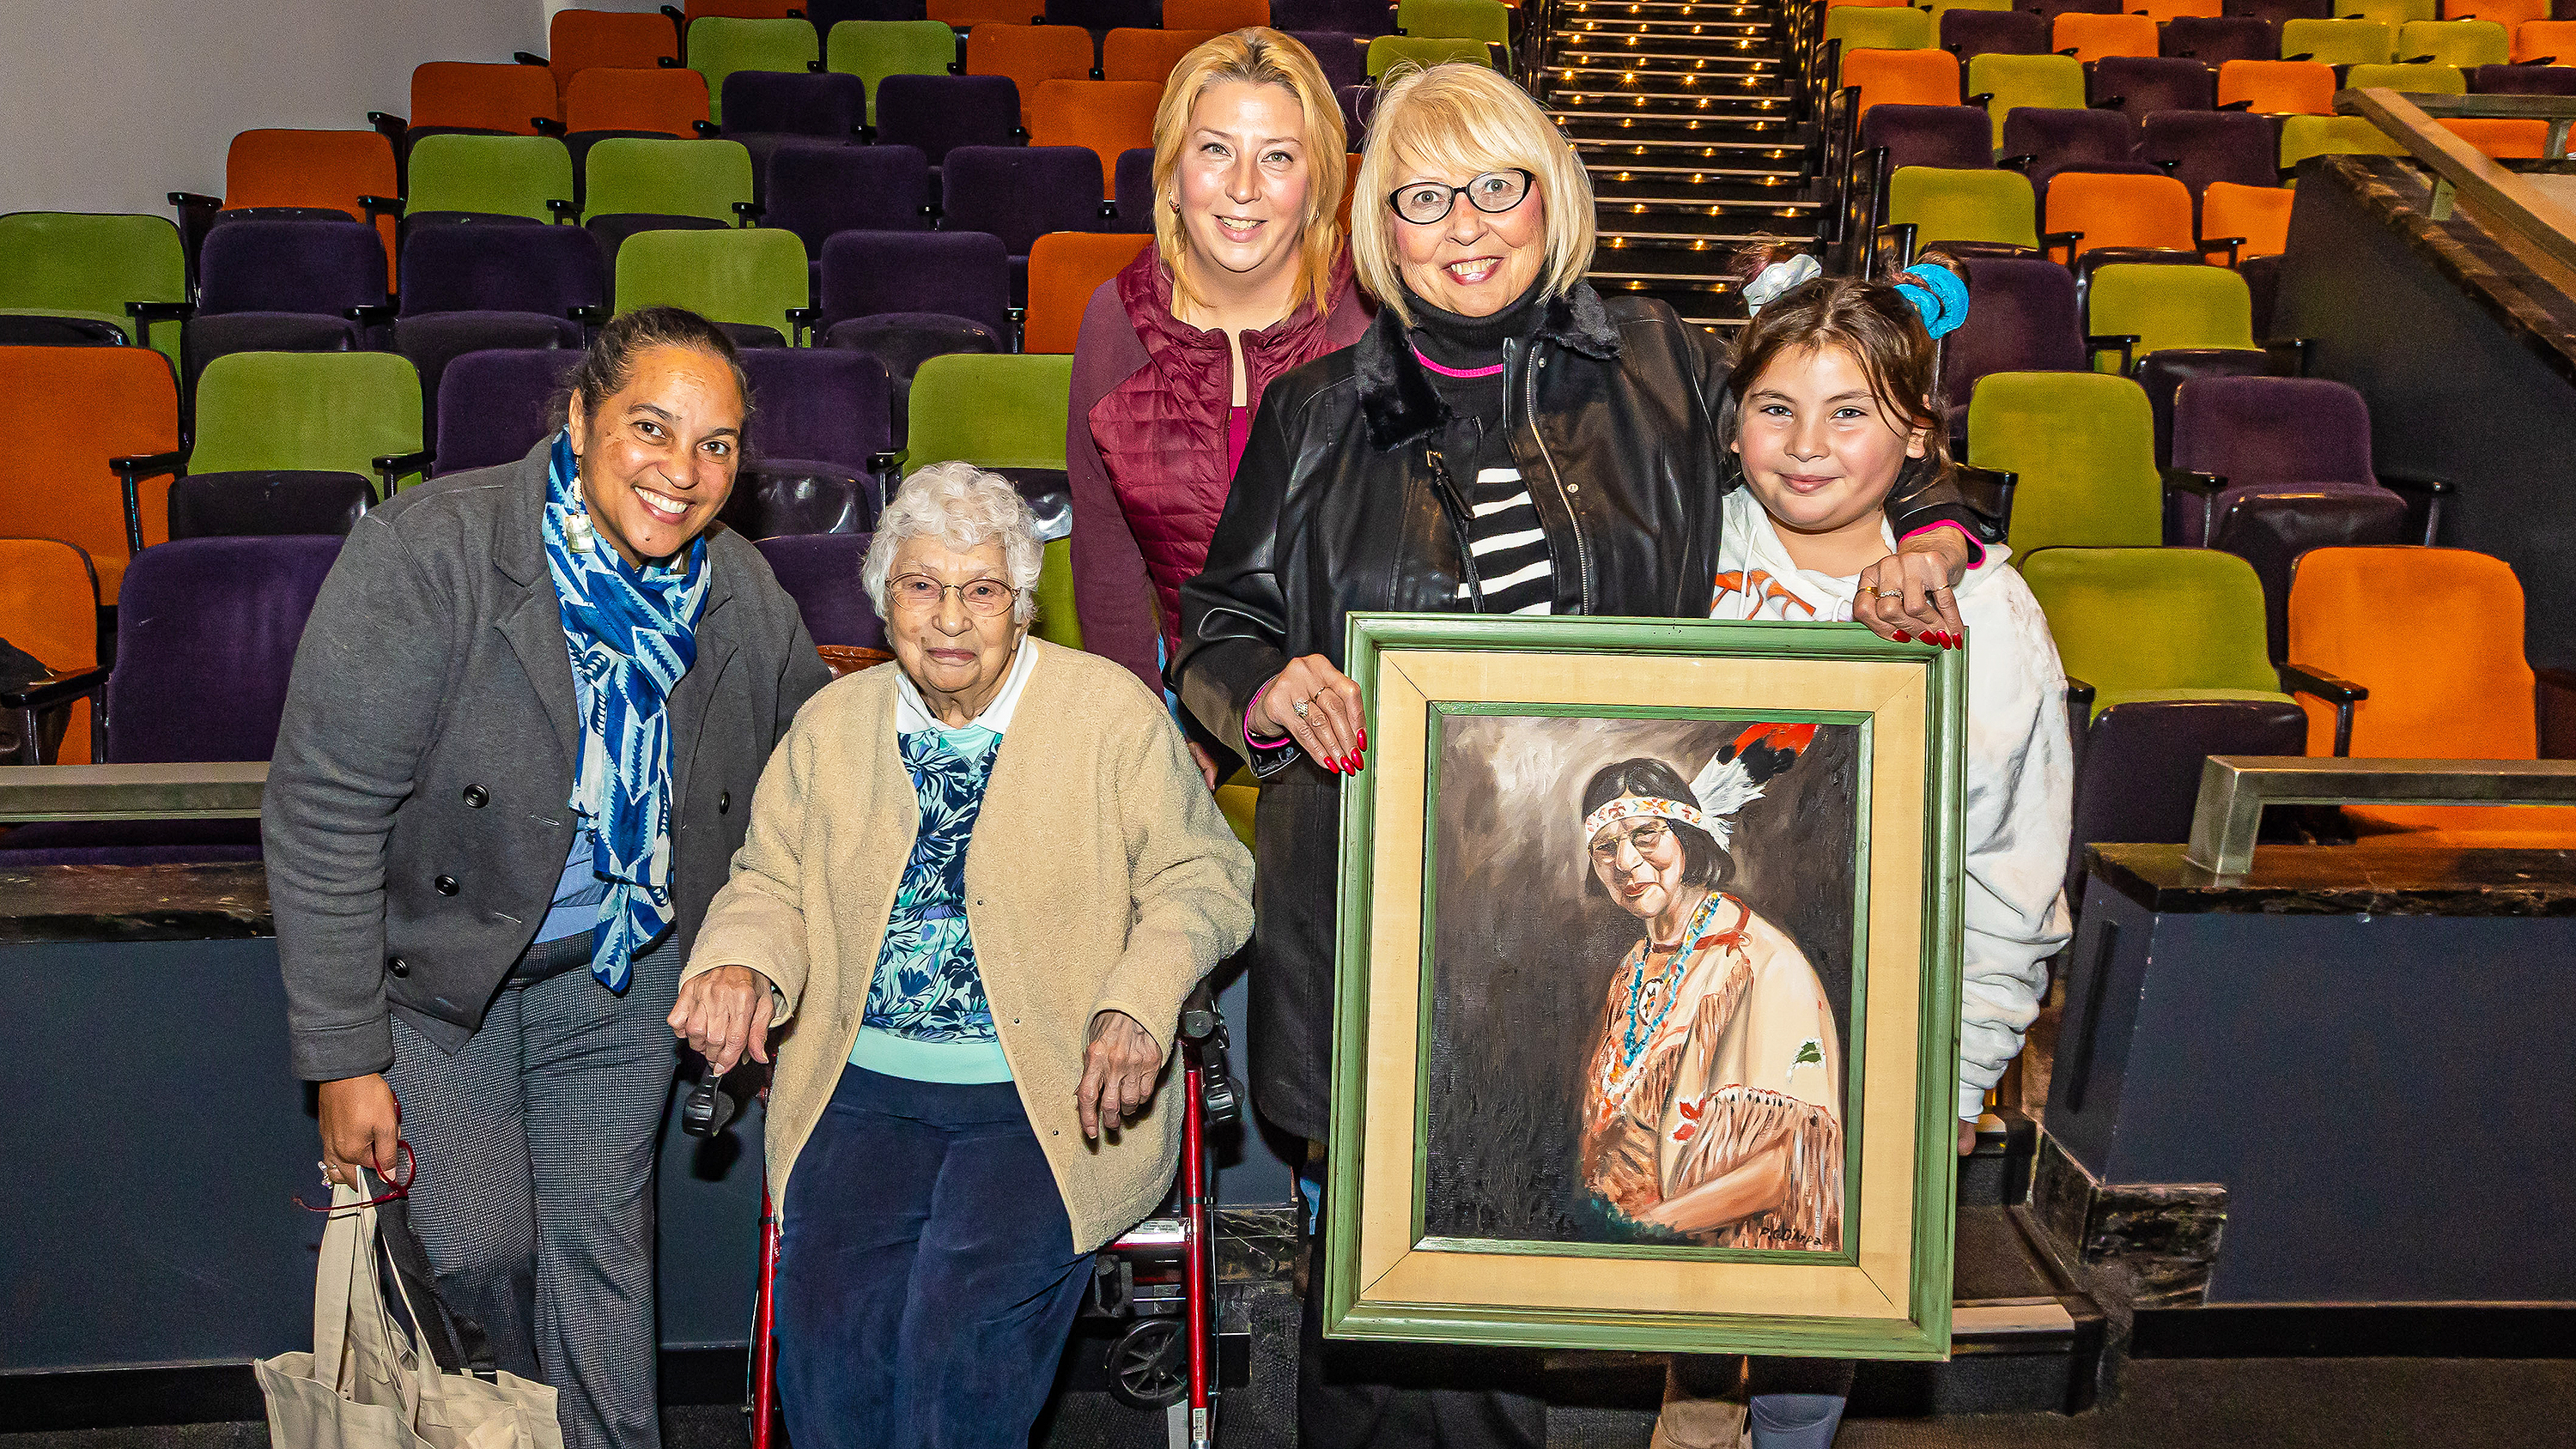 Loren Spears and descendents of Princess Red Wing pose with her portrait in the RISD Auditorium